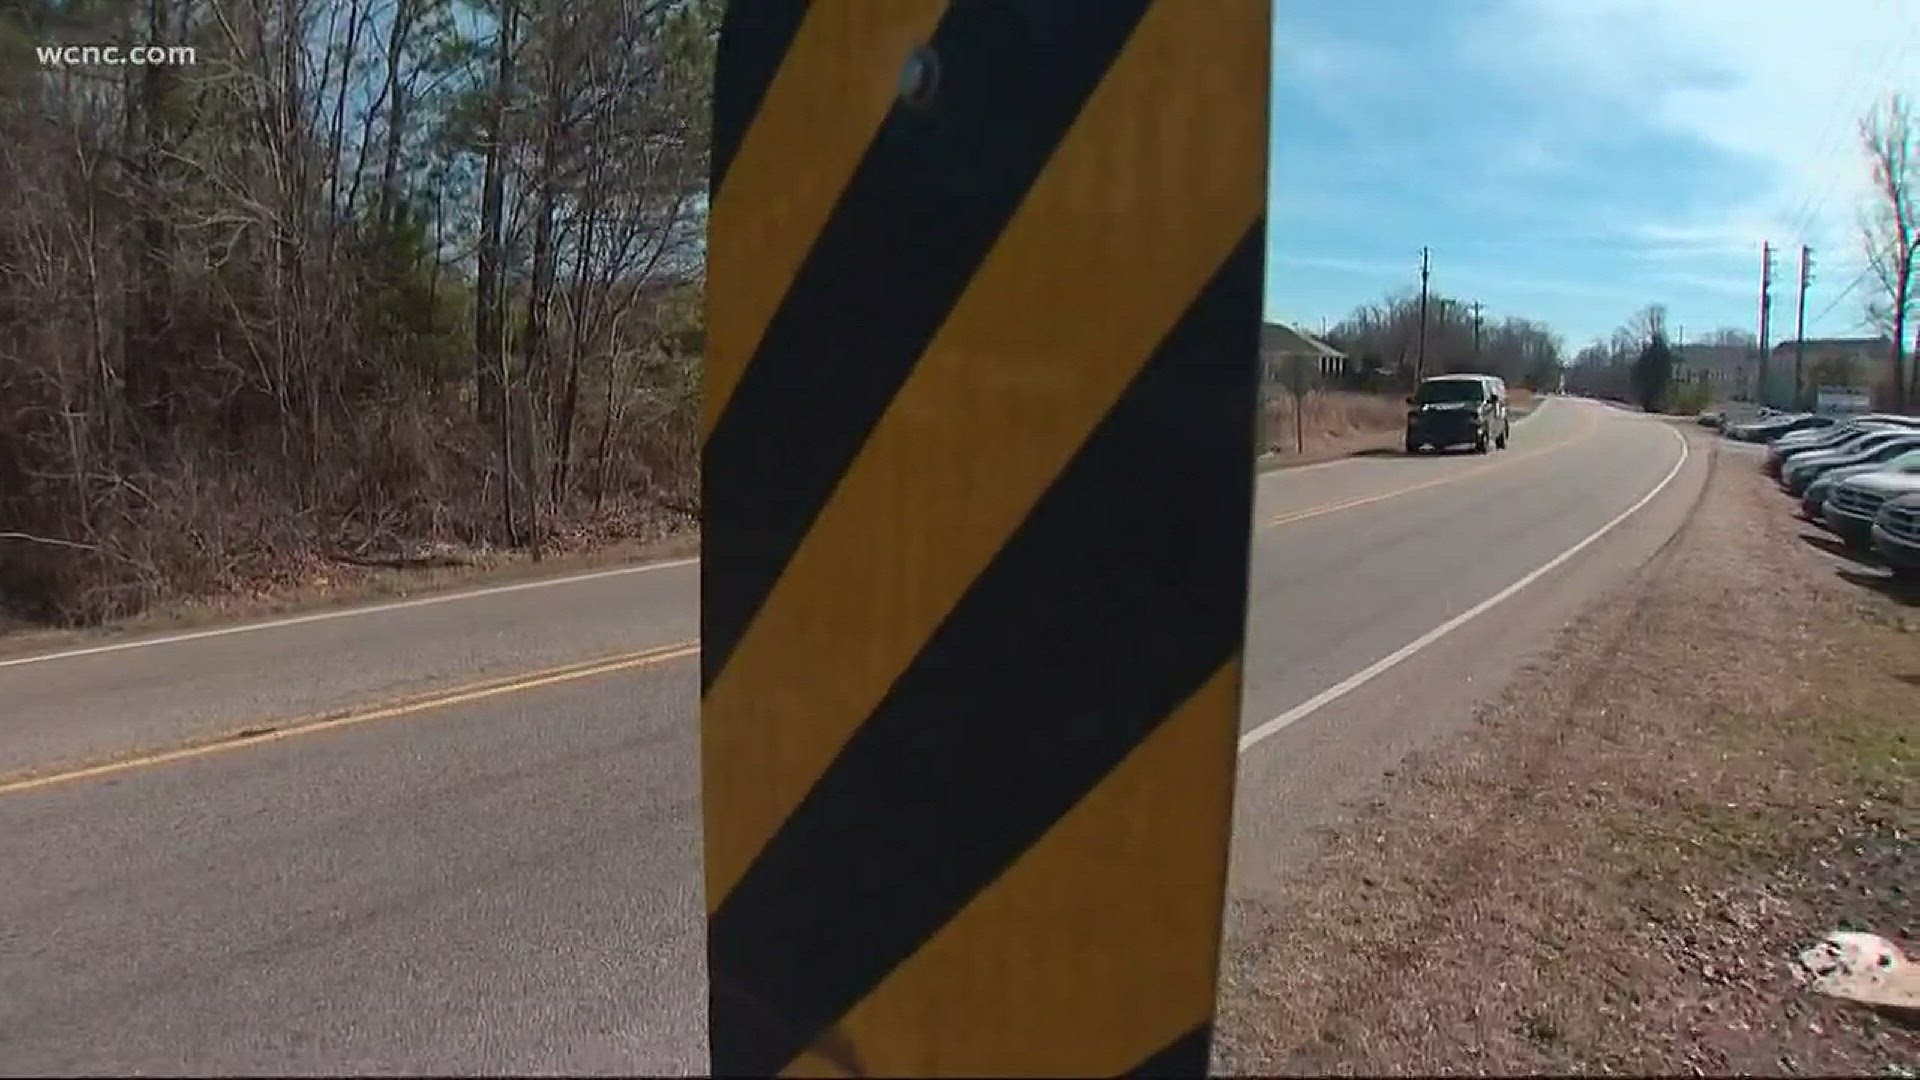 Officials are now starting to identify the roads and bridges in desperate need of repairing. Over the next decade, SCDOT said the extra money from the gas tax will go toward resurfacing roads and replacing bridges.